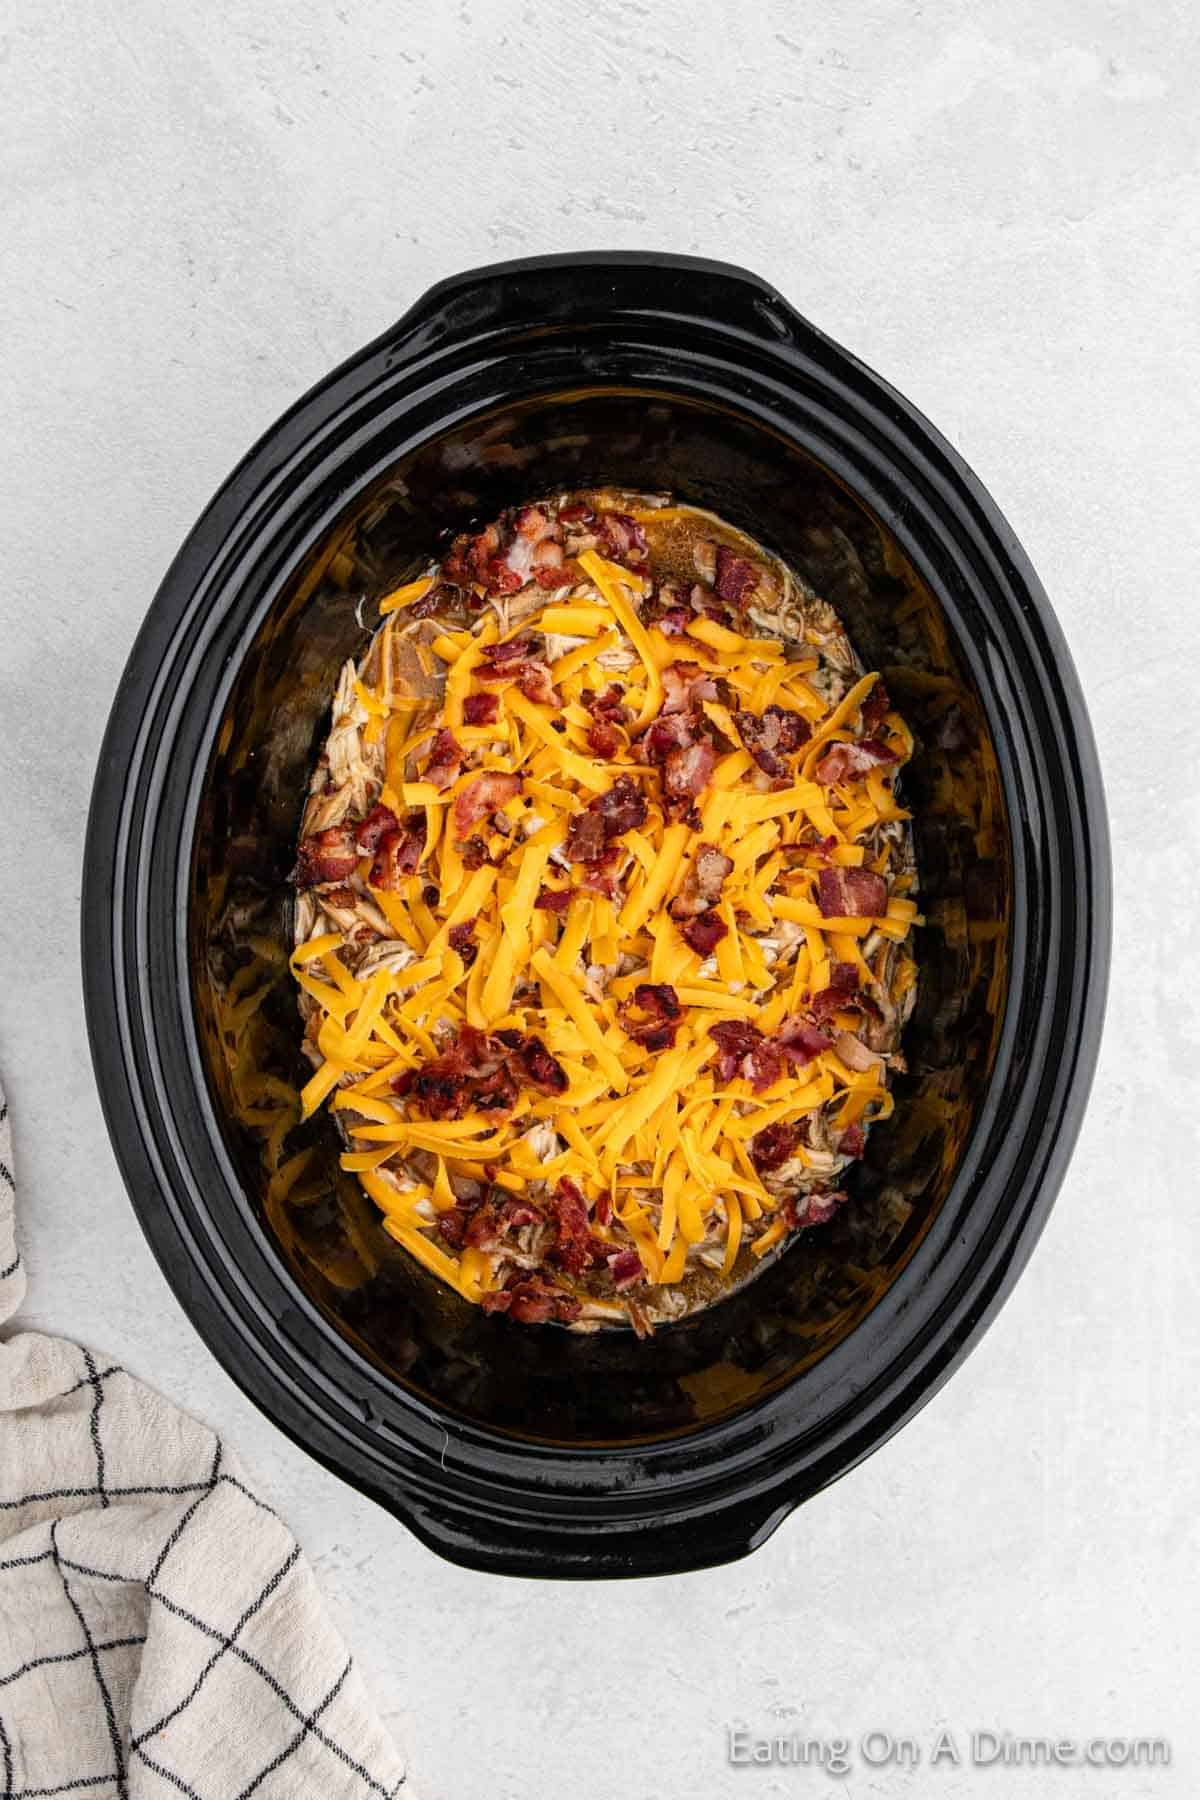 Top with shredded cheese and chopped bacon